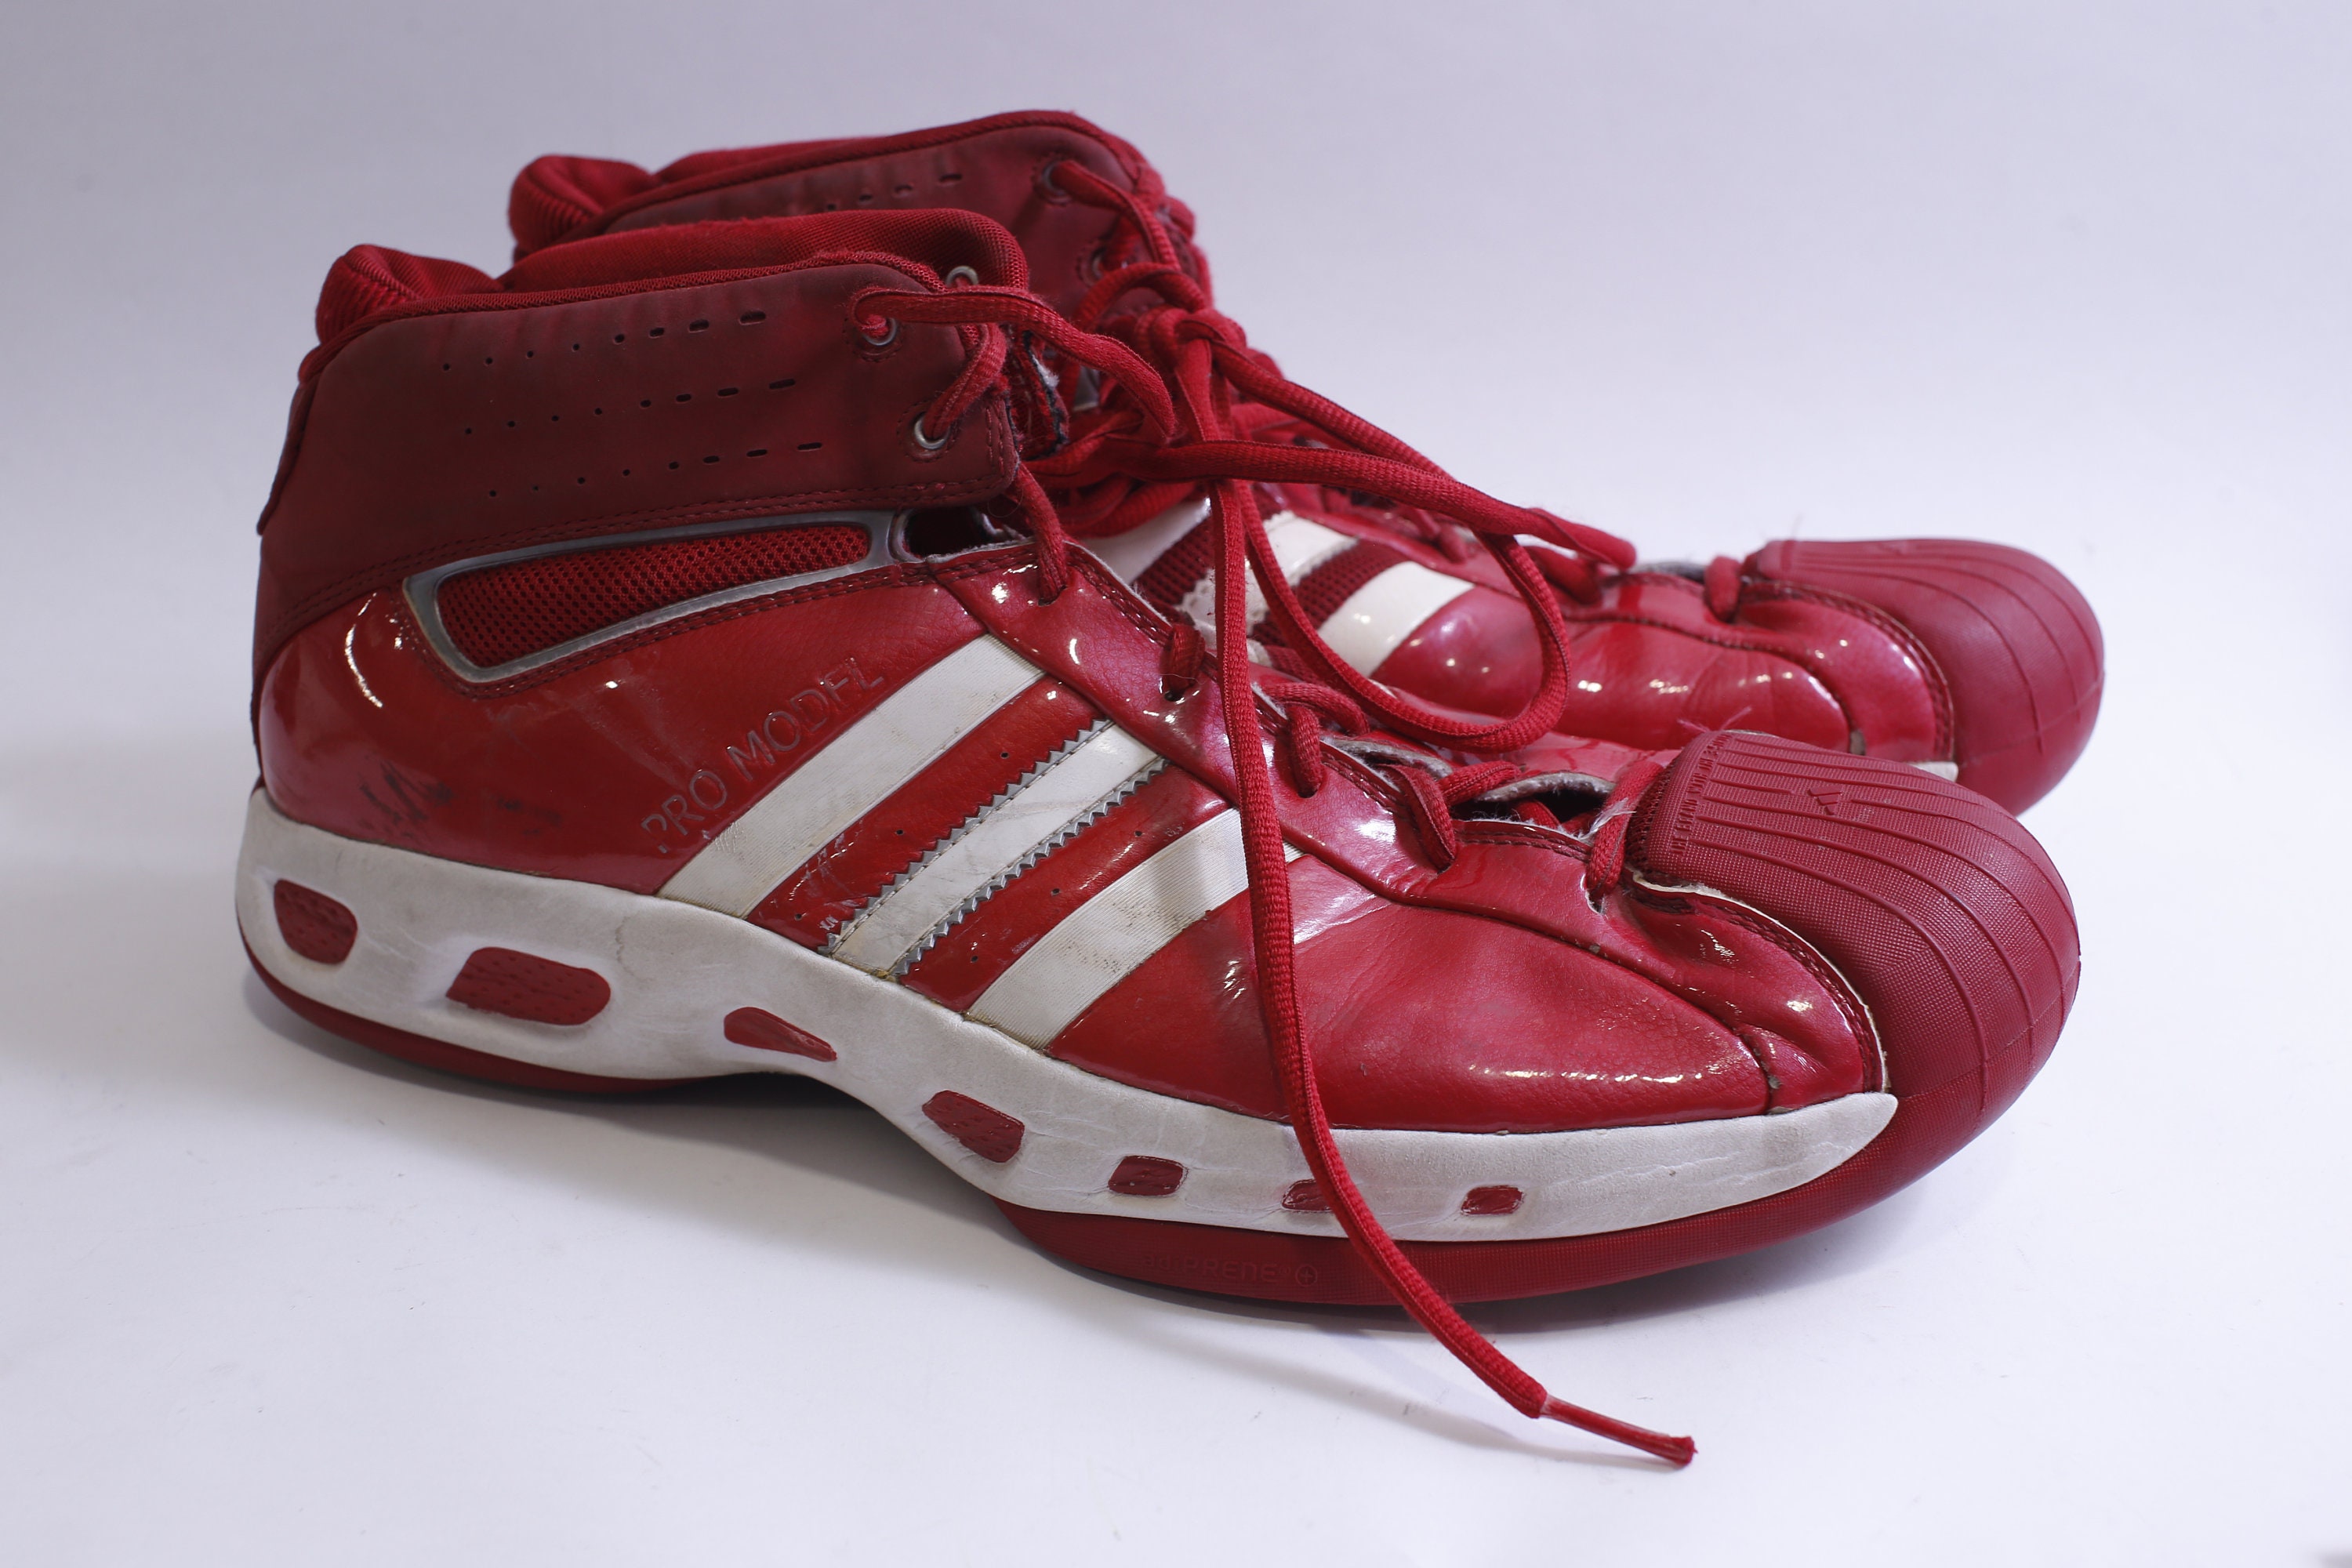 Adidas Pro Model Basketball Shoes Size 17 Used Condition - Etsy Finland